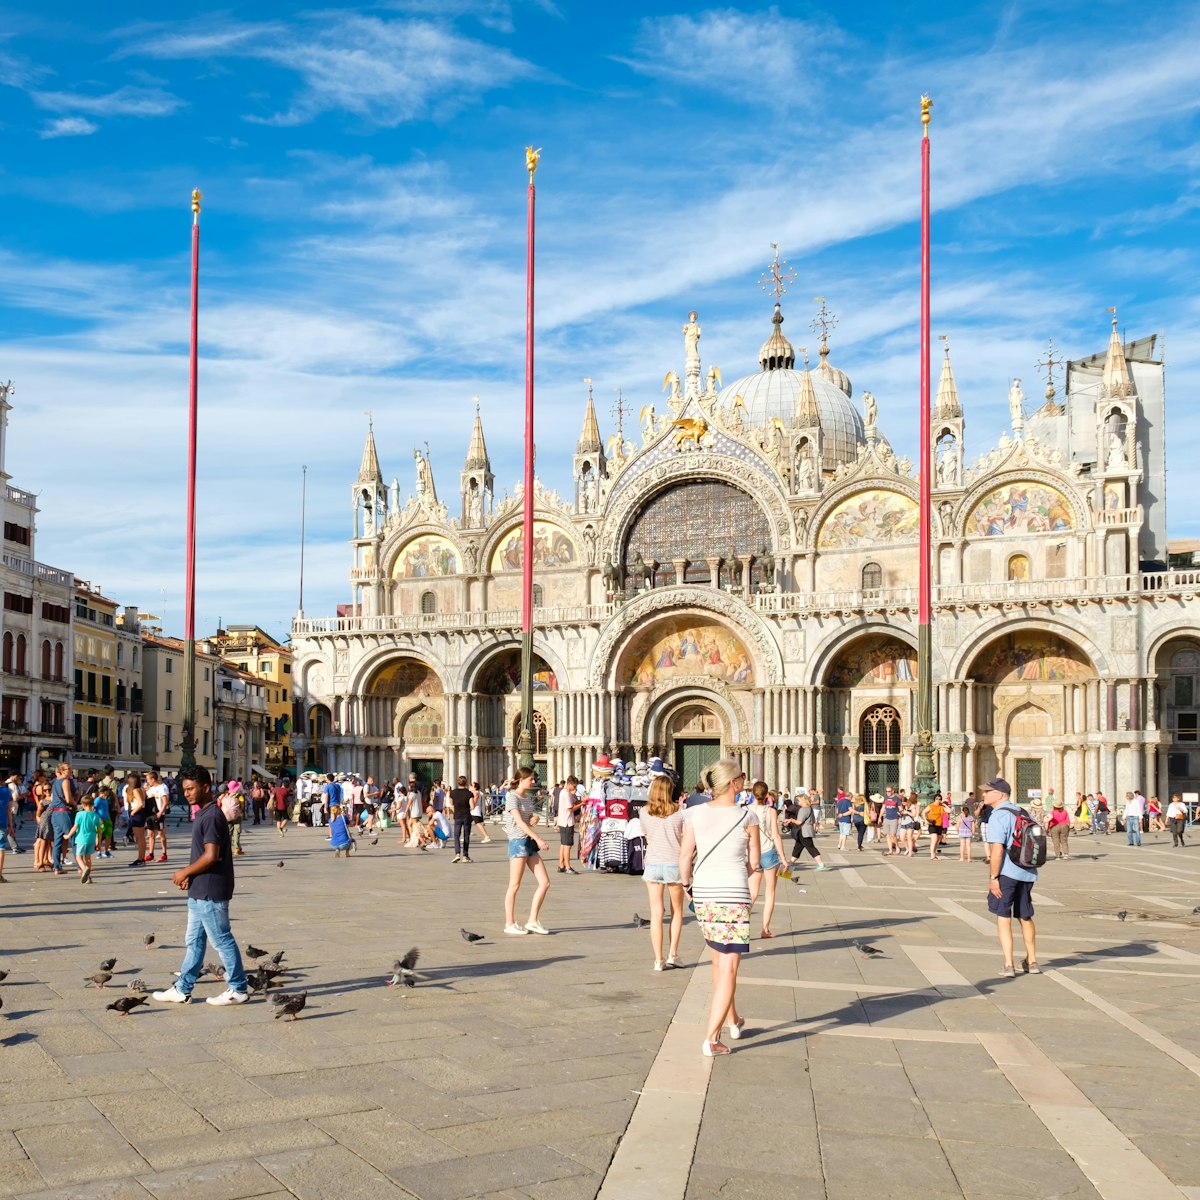 VENICE, ITALY - JULY 27,2017 : St Mark's Square in Venice on a sunny summer day
727212772
ancient, architecture, art, attraction, basilica, beautiful, building, byzantine, cathedral, catholic, christian, church, city, cultural, culture, destination, europe, european, famous, historic, history, holiday, italian, italy, landmark, mediterranean, old, people, person, piazza, pigeon, religion, religious, romantic, saint mark, saint marks basilica, saint marks square, san marco, sightseeing, square, st mark, st marks, st marks square, summer, tourism, tourist, travel, vacation, venetian, venice